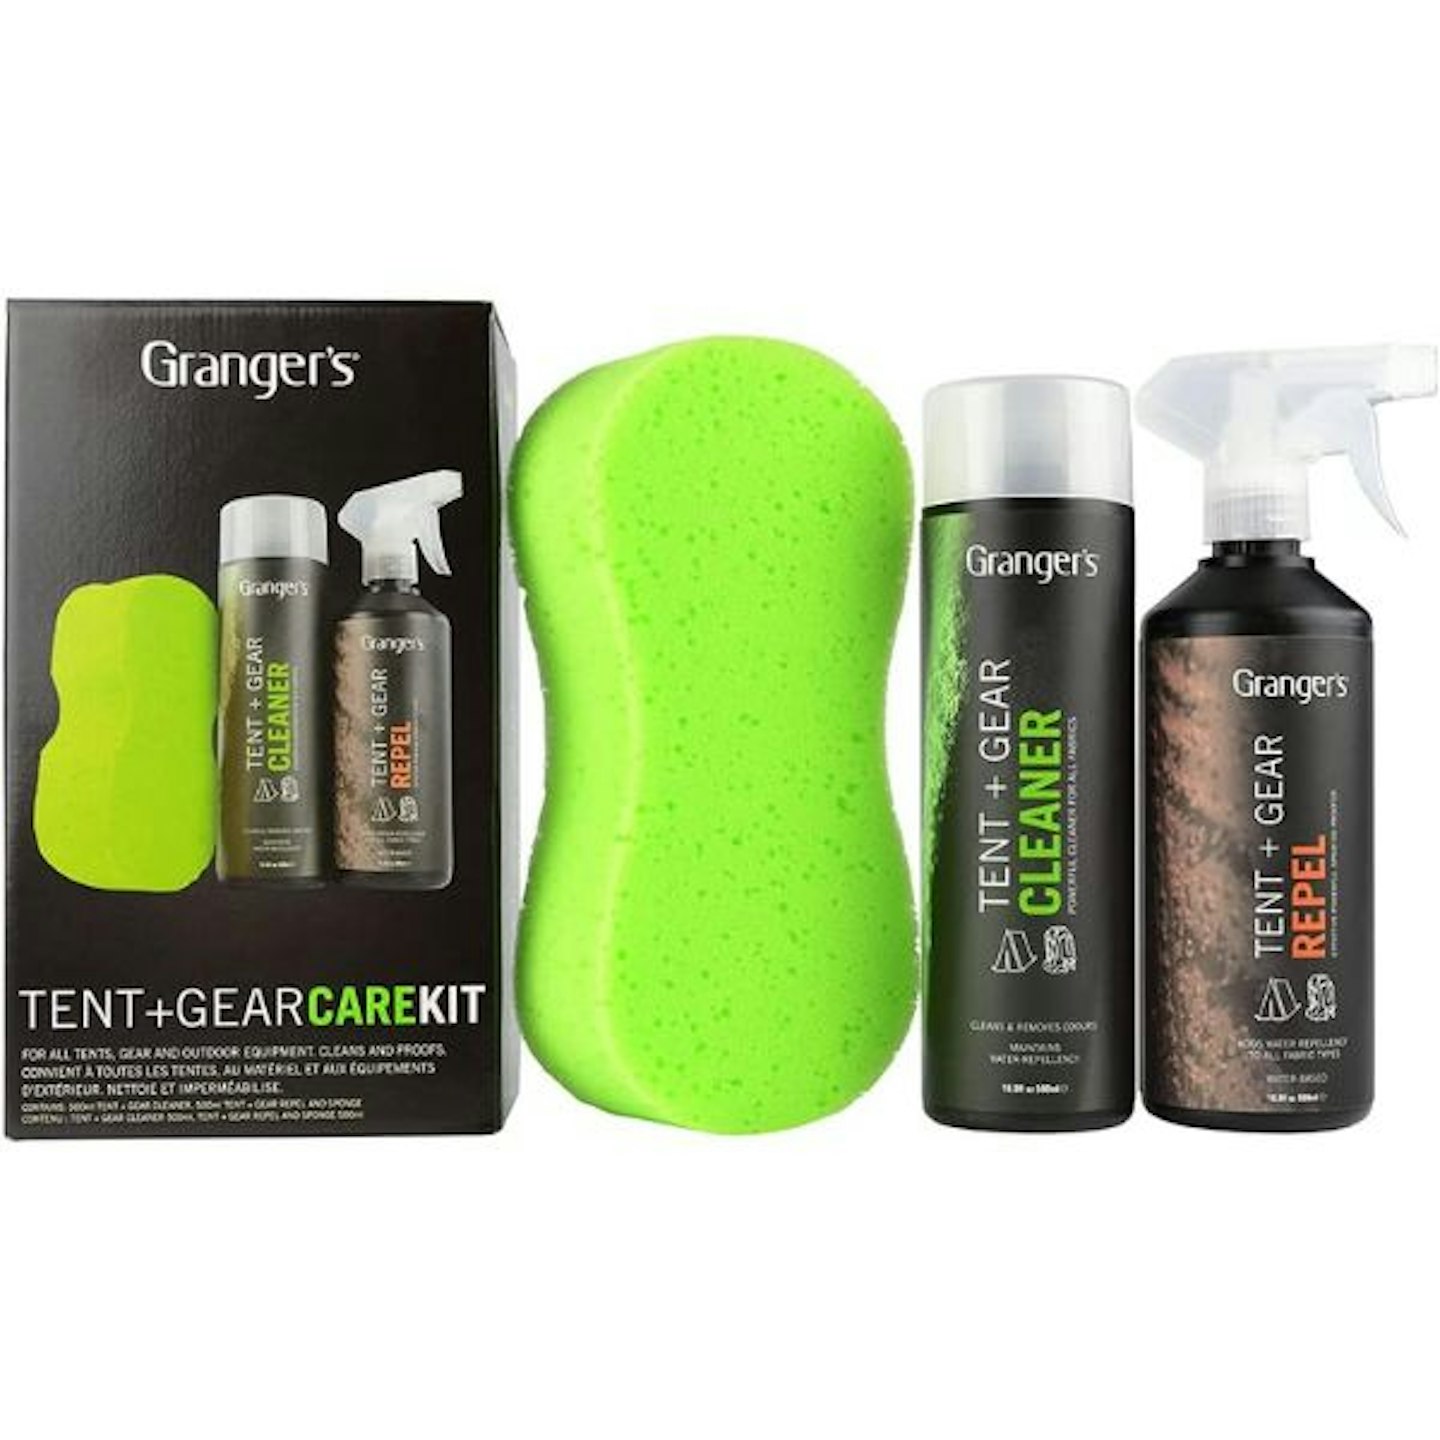 Grangers Tent And Gear Kit